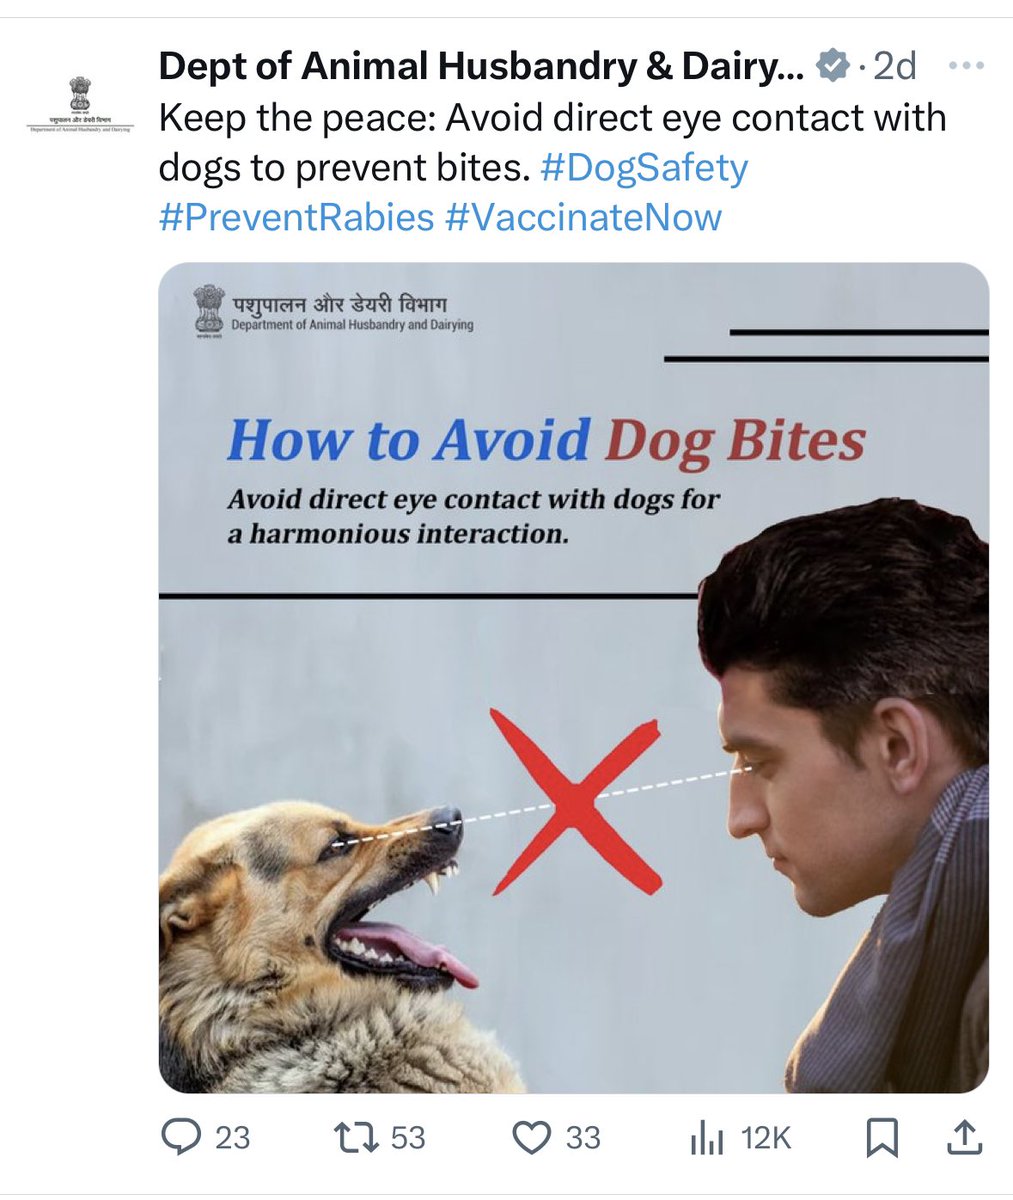 #bhubaneswarbuzz Considering the rise of dog bite cases all over country looks like Govt has started awareness campaigns, will it help? What do you think?